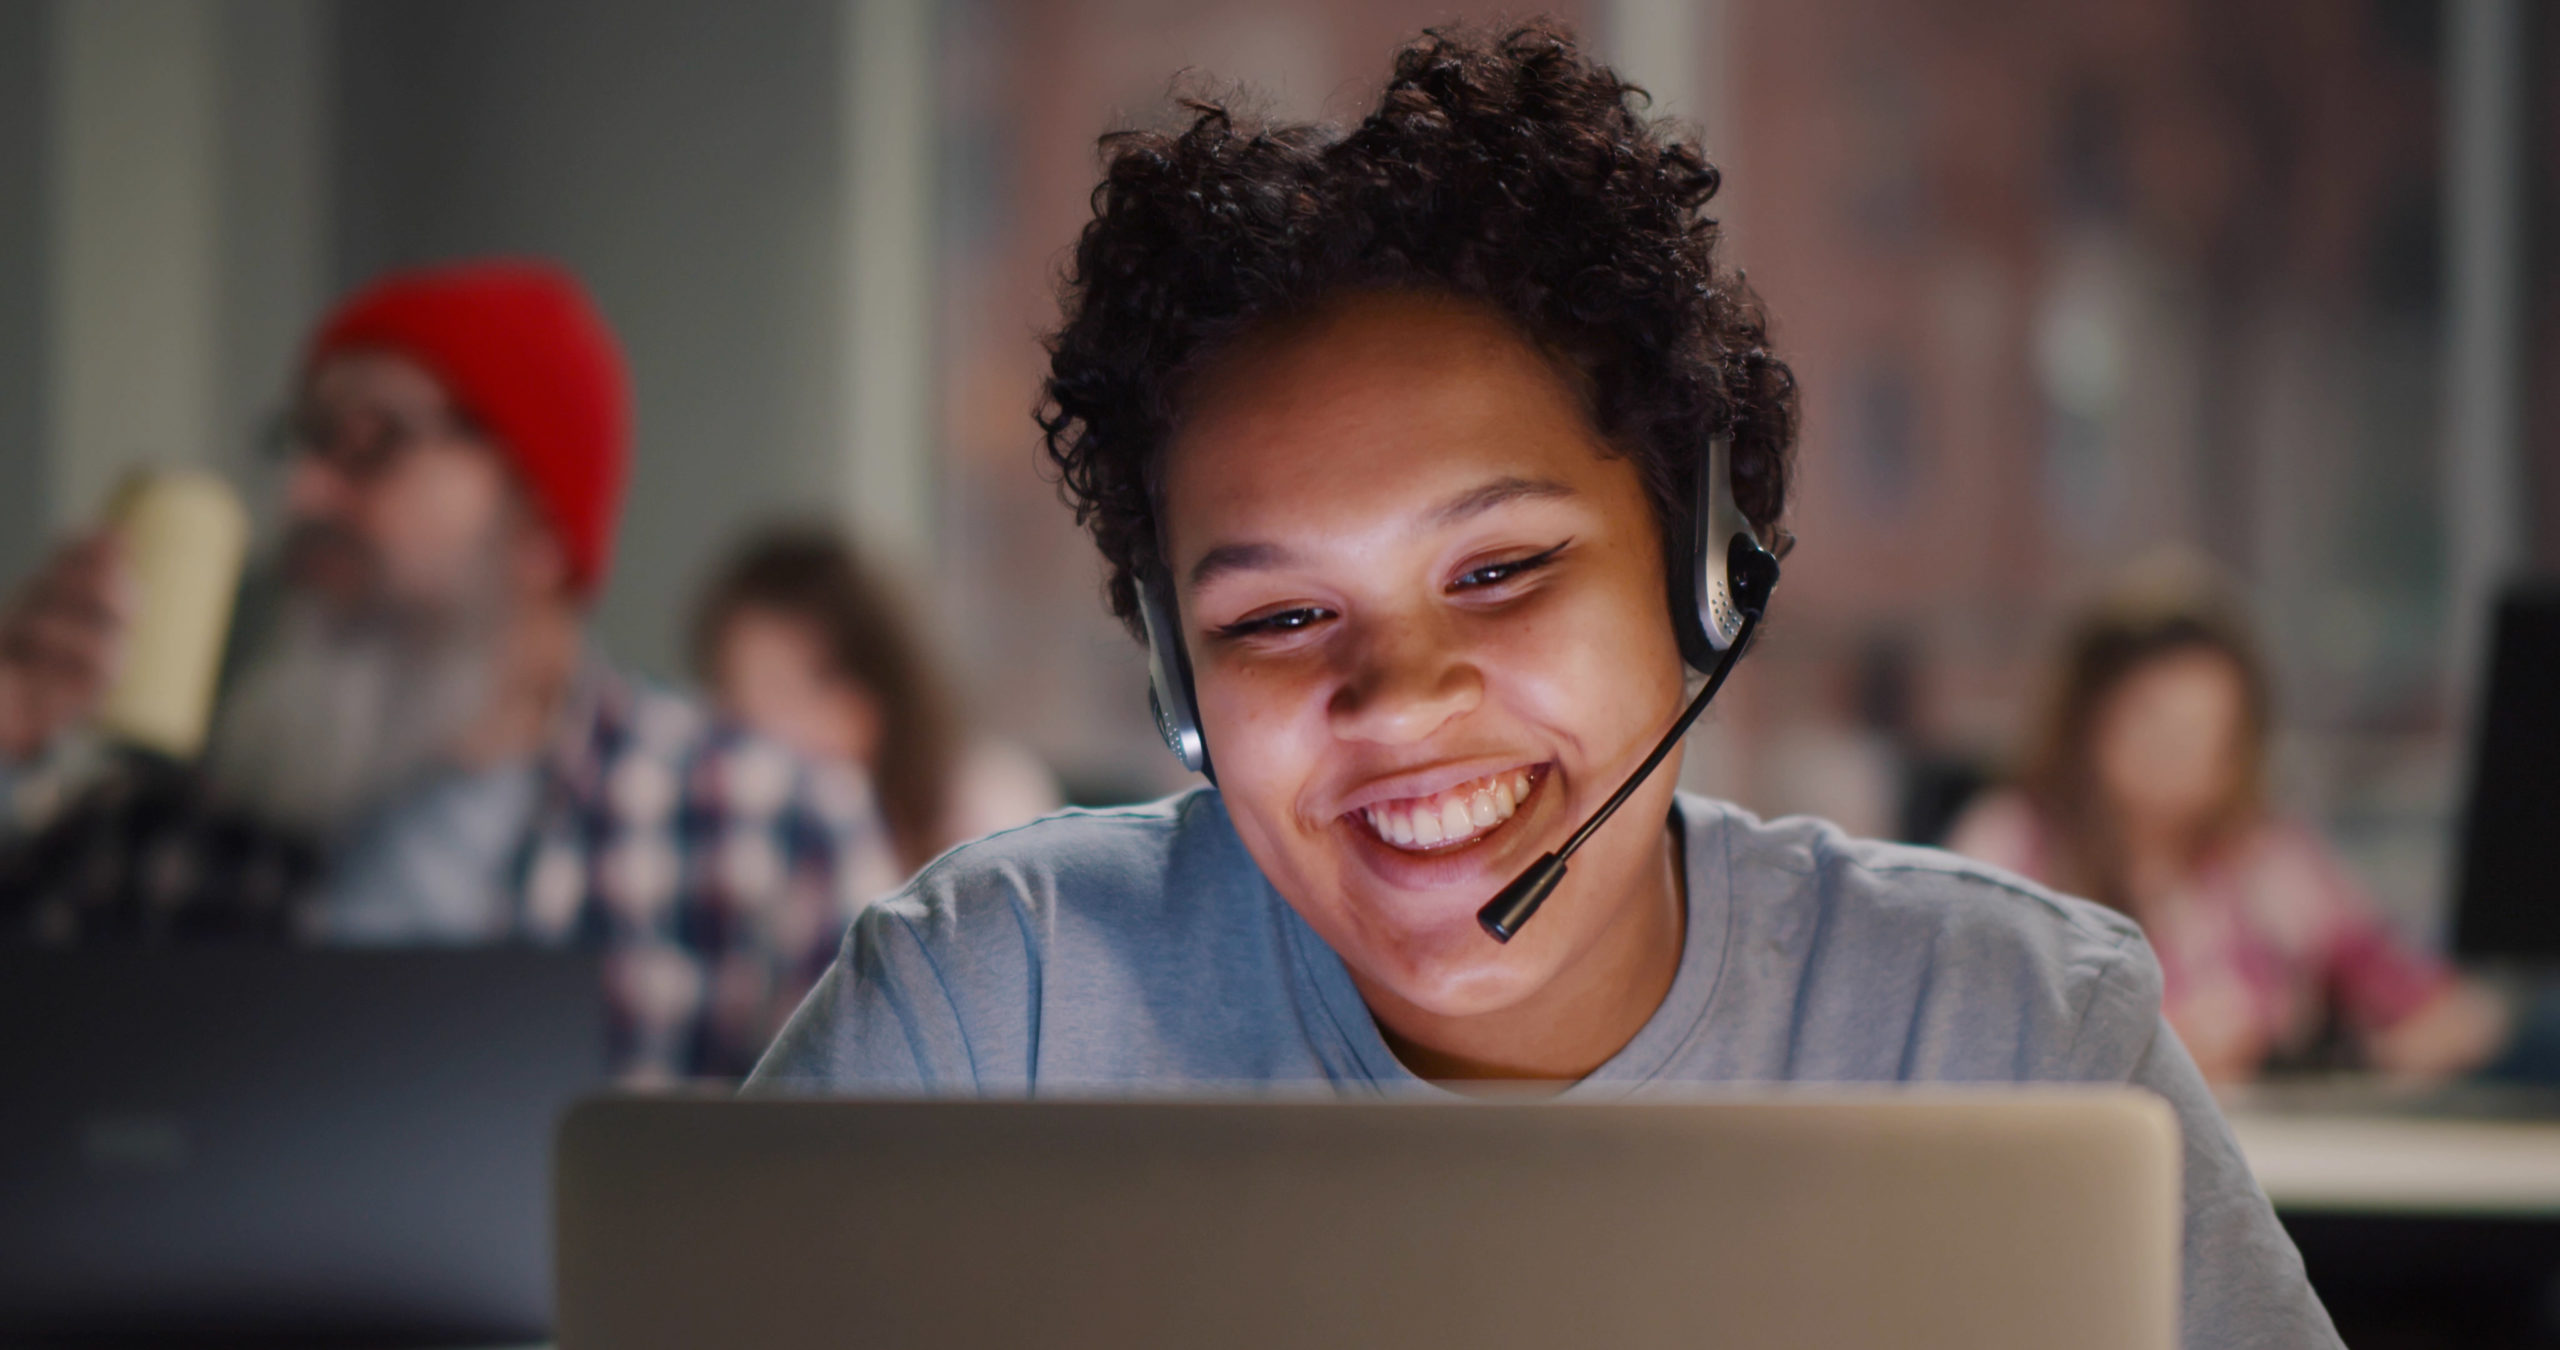 Administrative & Customer Support Salary Guide